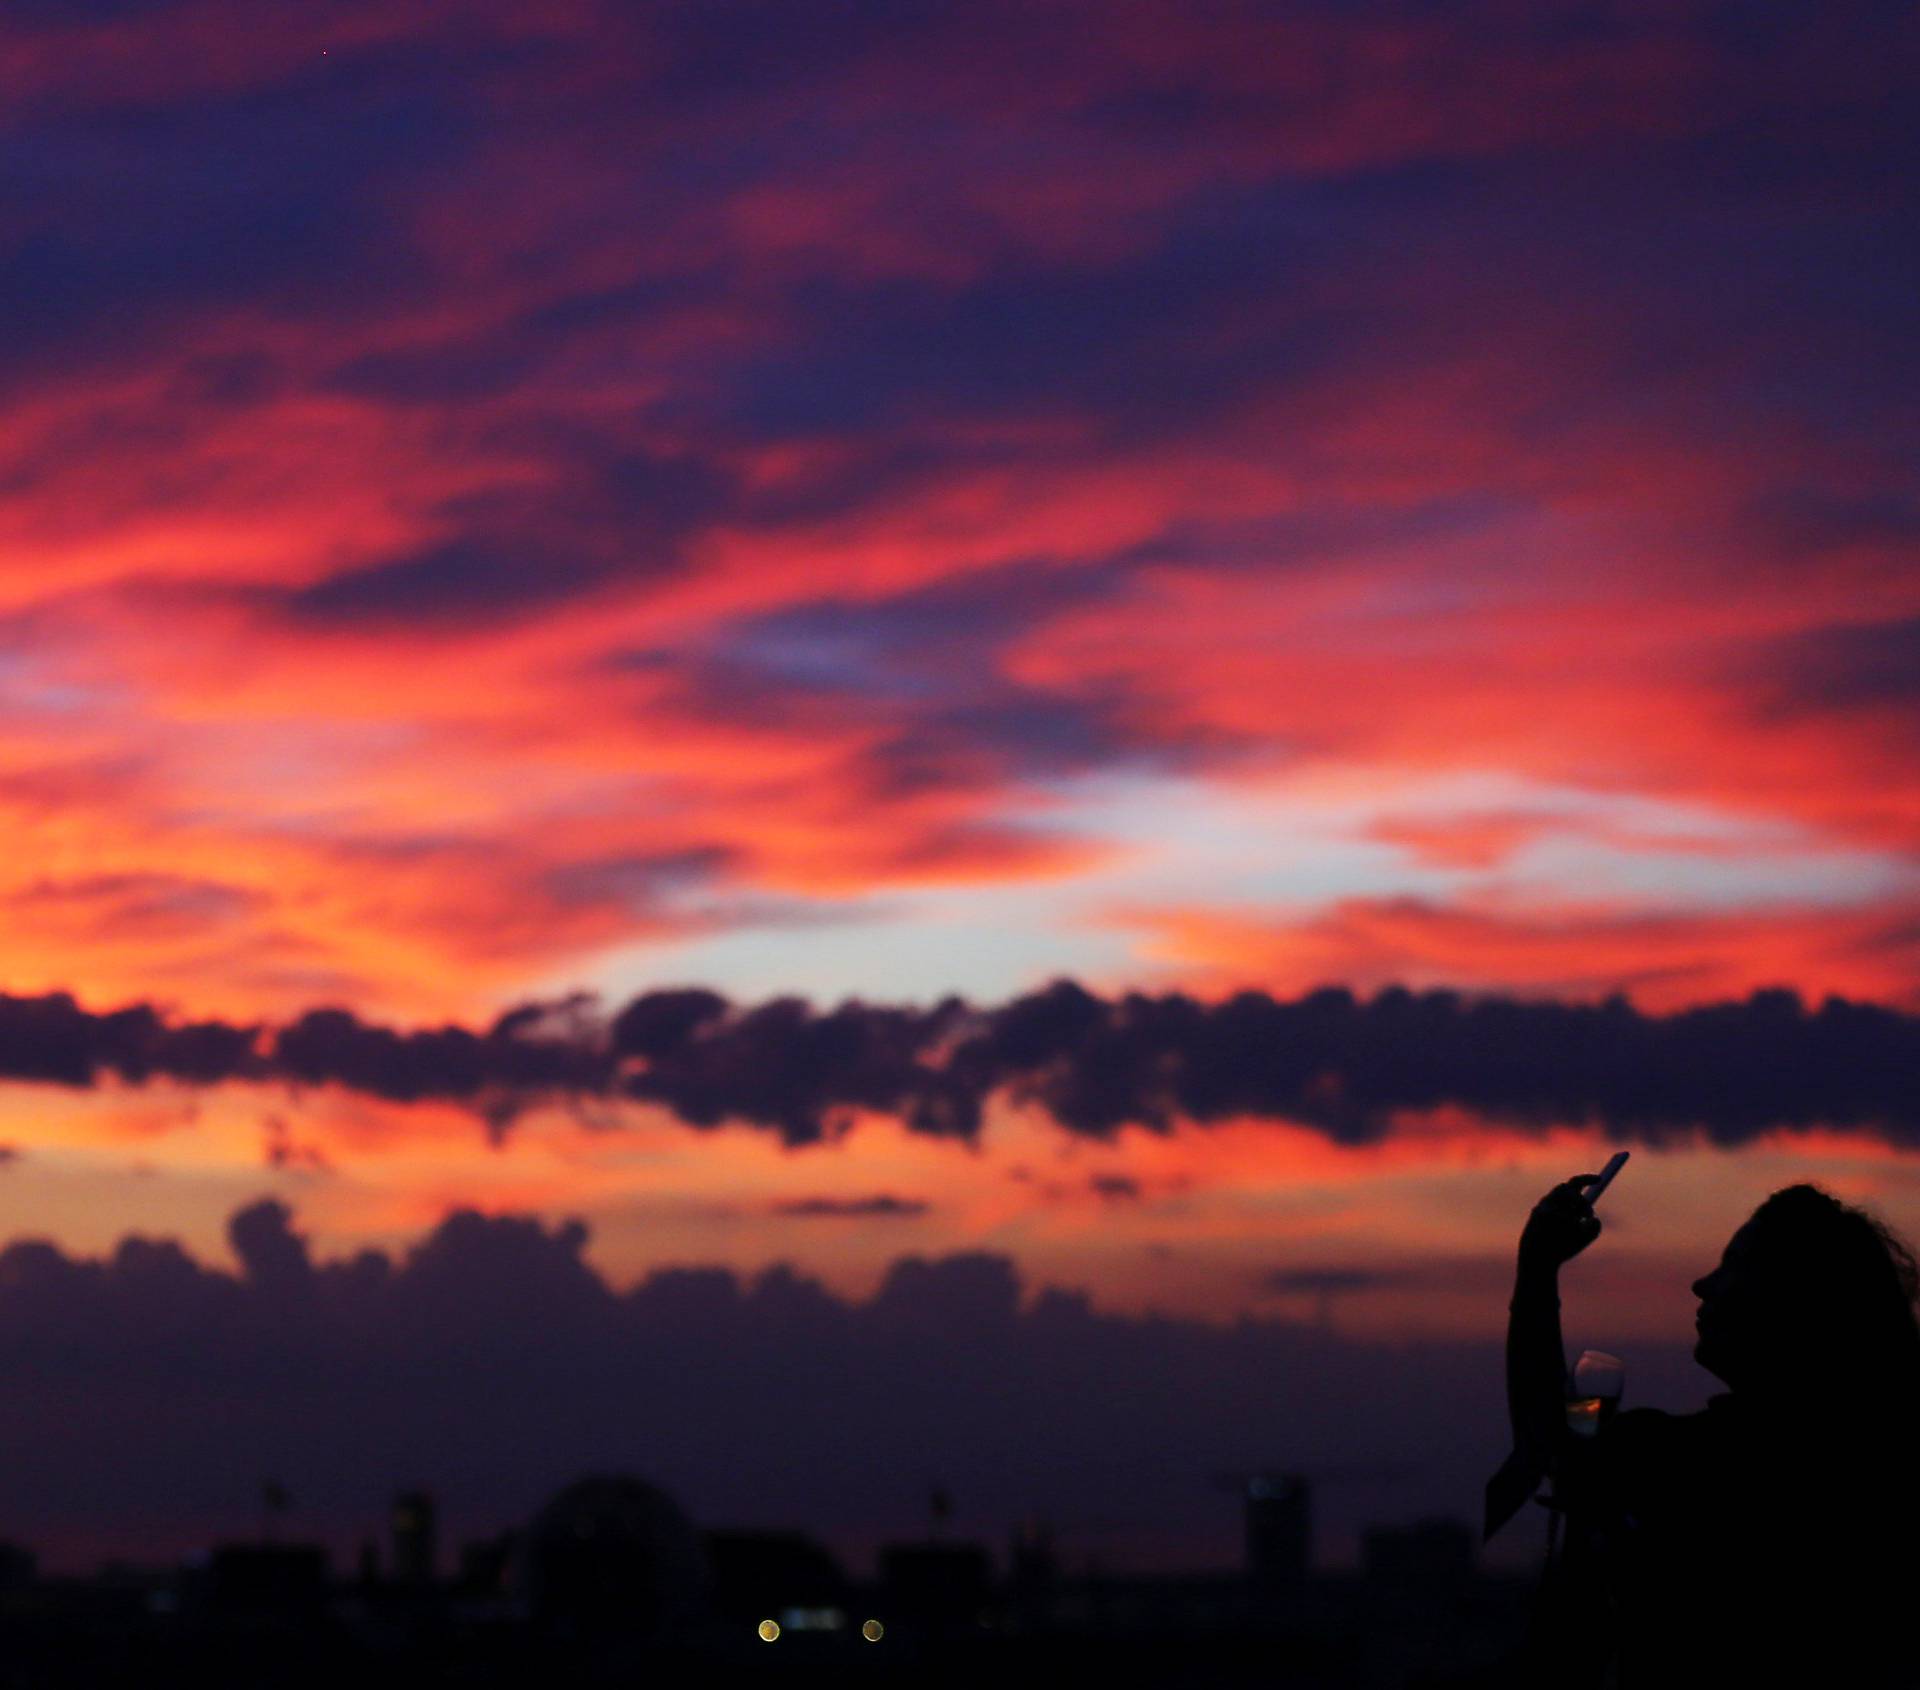 A woman takes pictures of a sunset close to the square Potsdamer Platz in Berlin